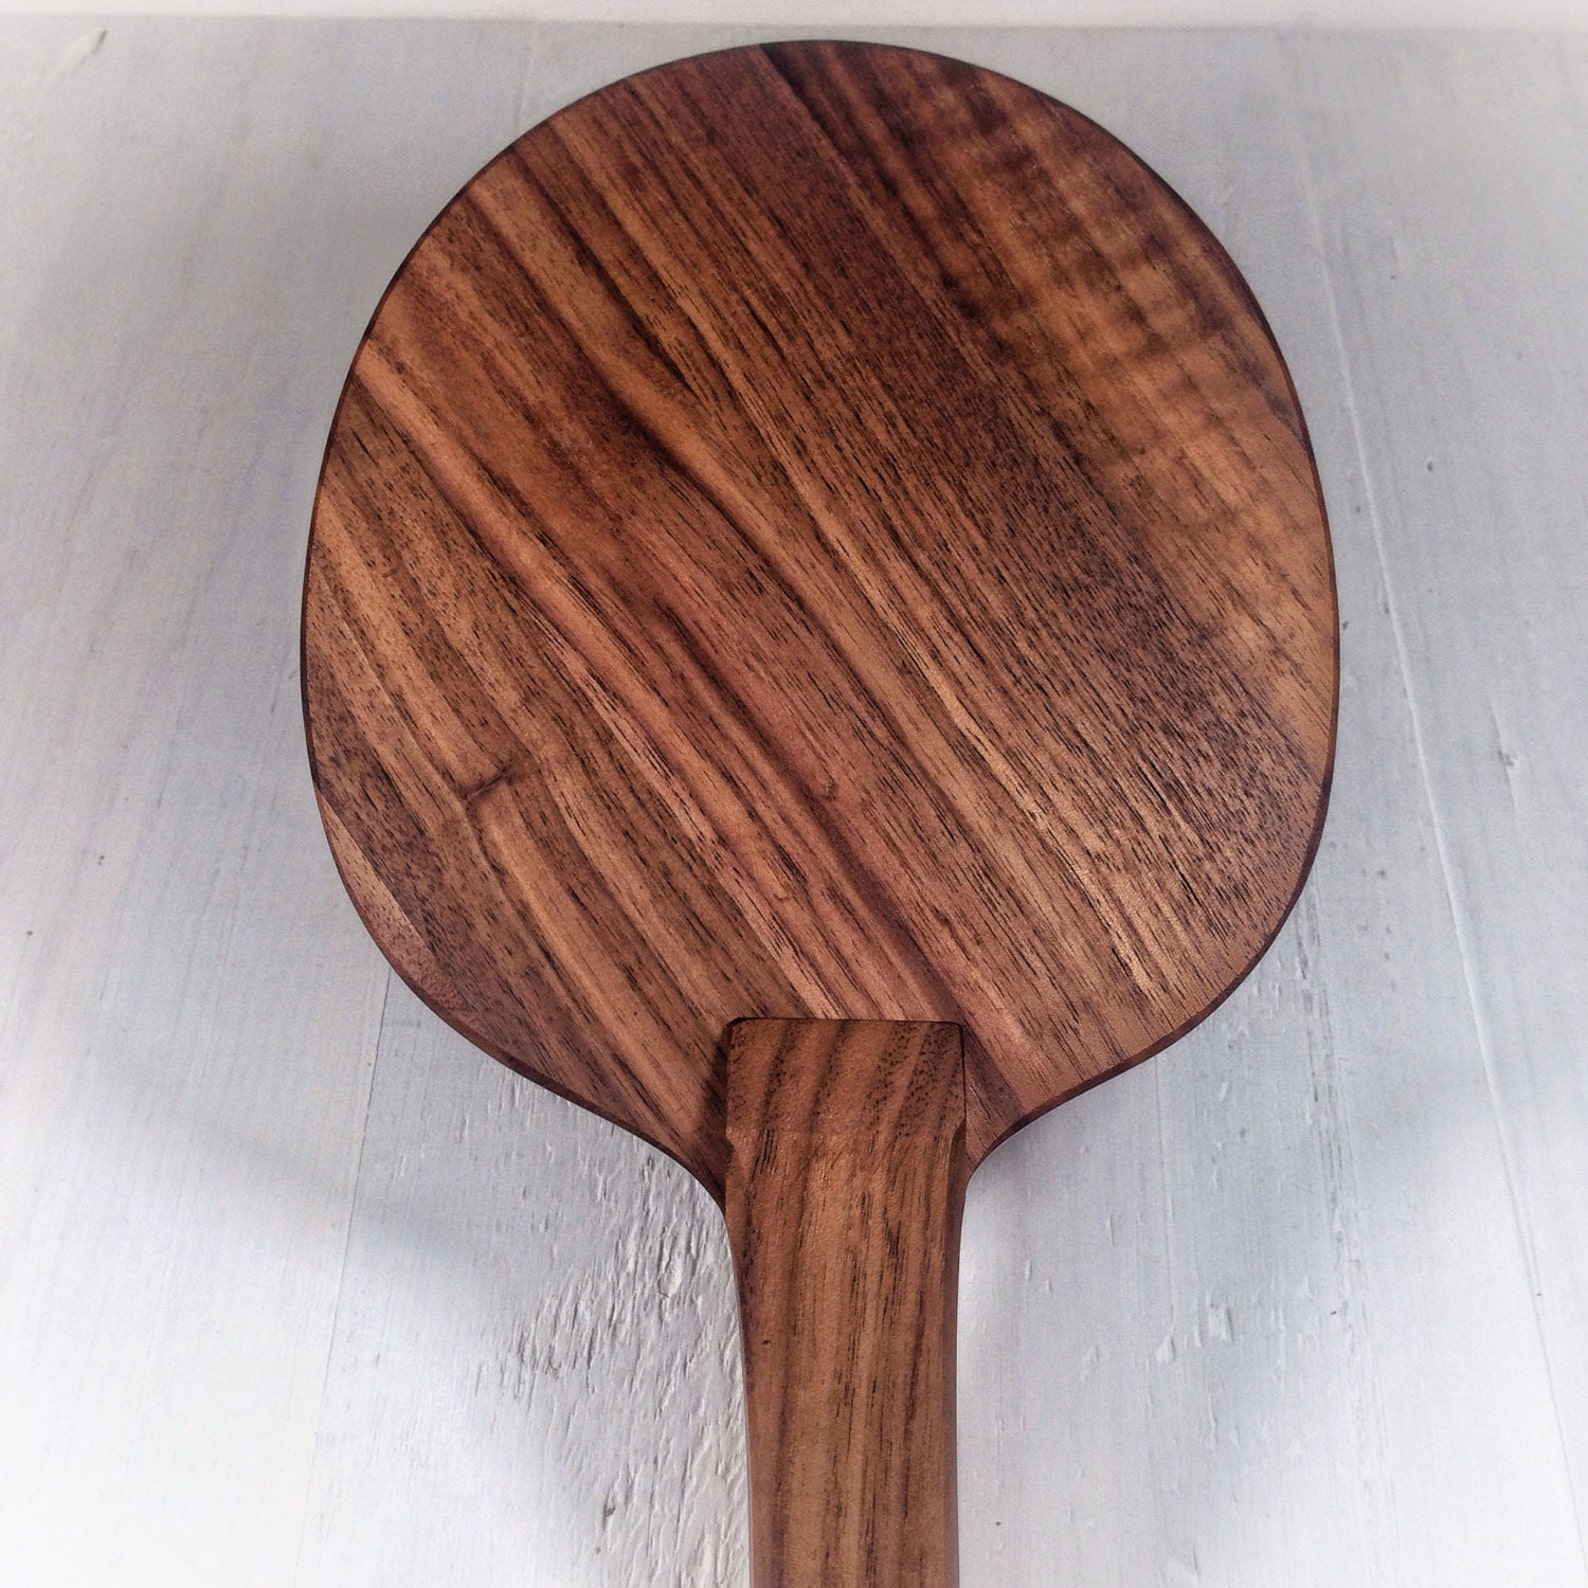 Ping Pong Paddle Personalized Wood Ping Pong Playable | Etsy